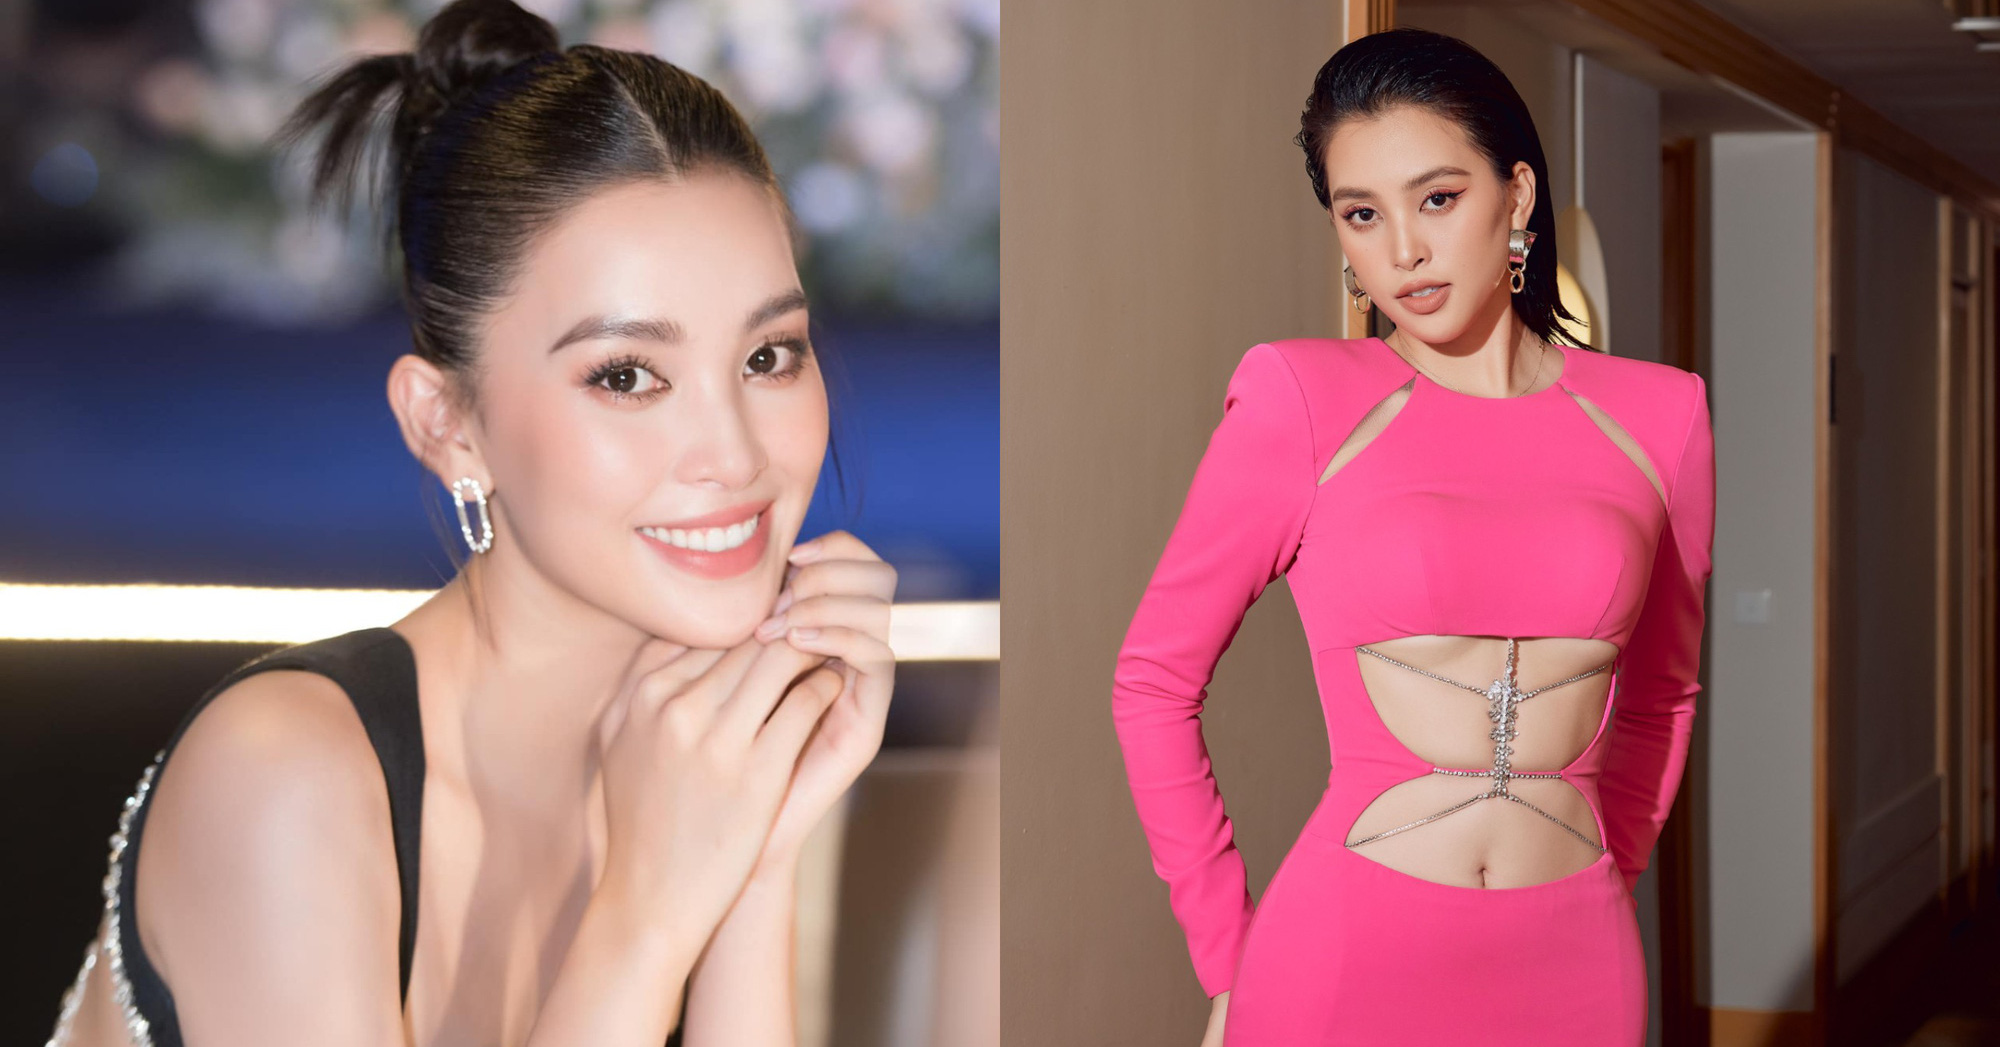 What did Miss Tran Tieu Vy say when receiving the “Face of the Year” award, being praised for “a once-in-a-thousand beauty”?